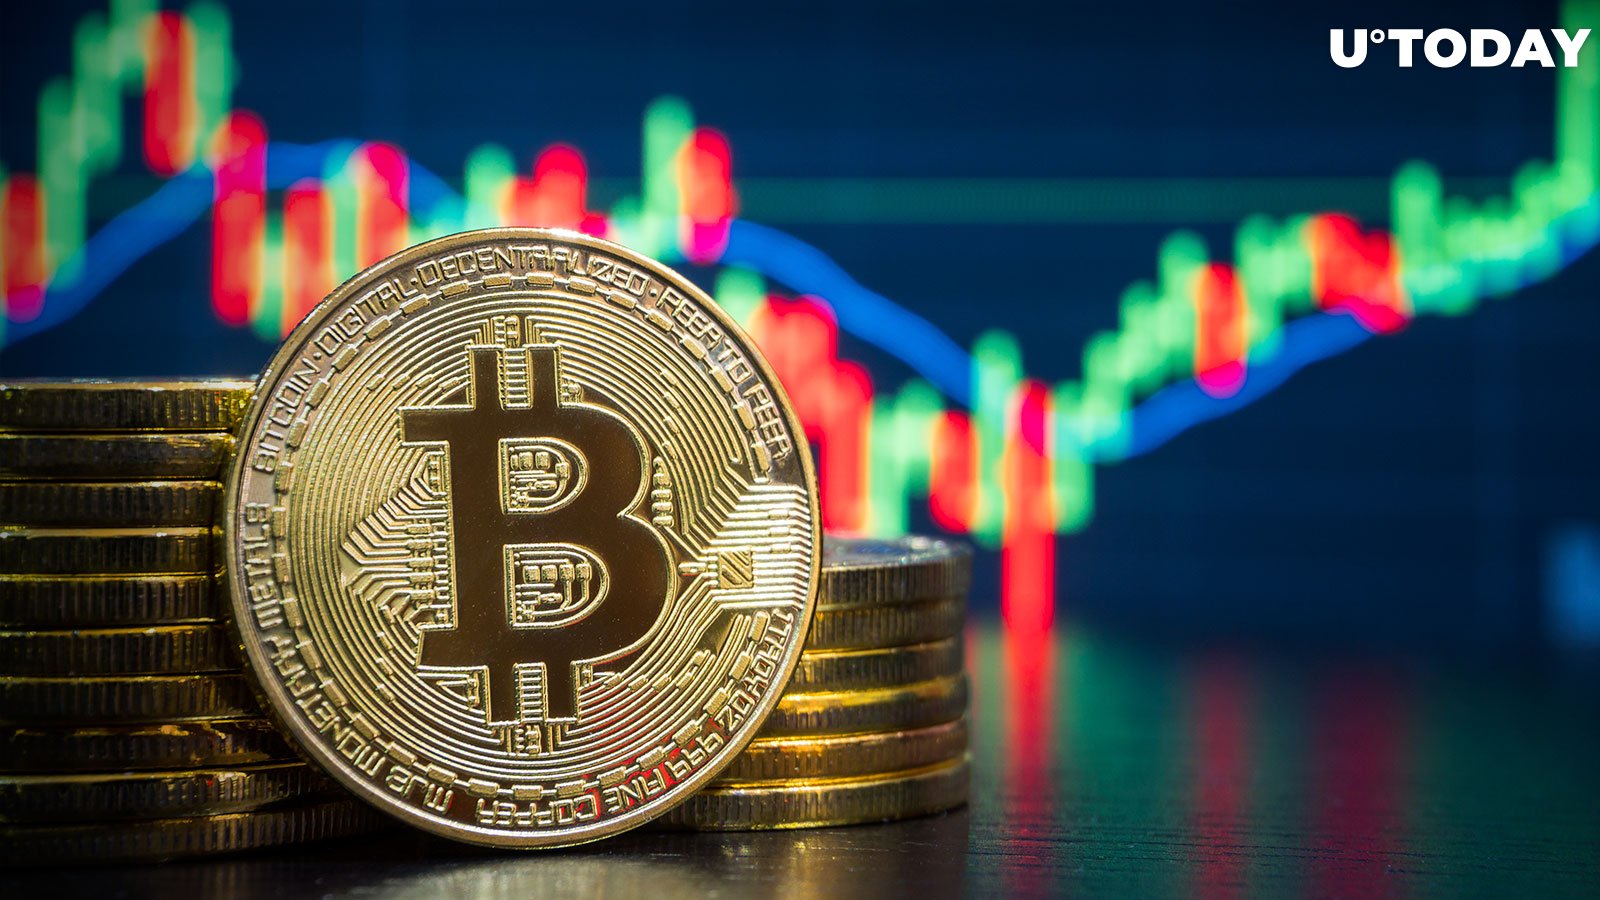 Bitcoin (BTC) to Hit K After Bullish Weekly Divergence, Says Top Analyst